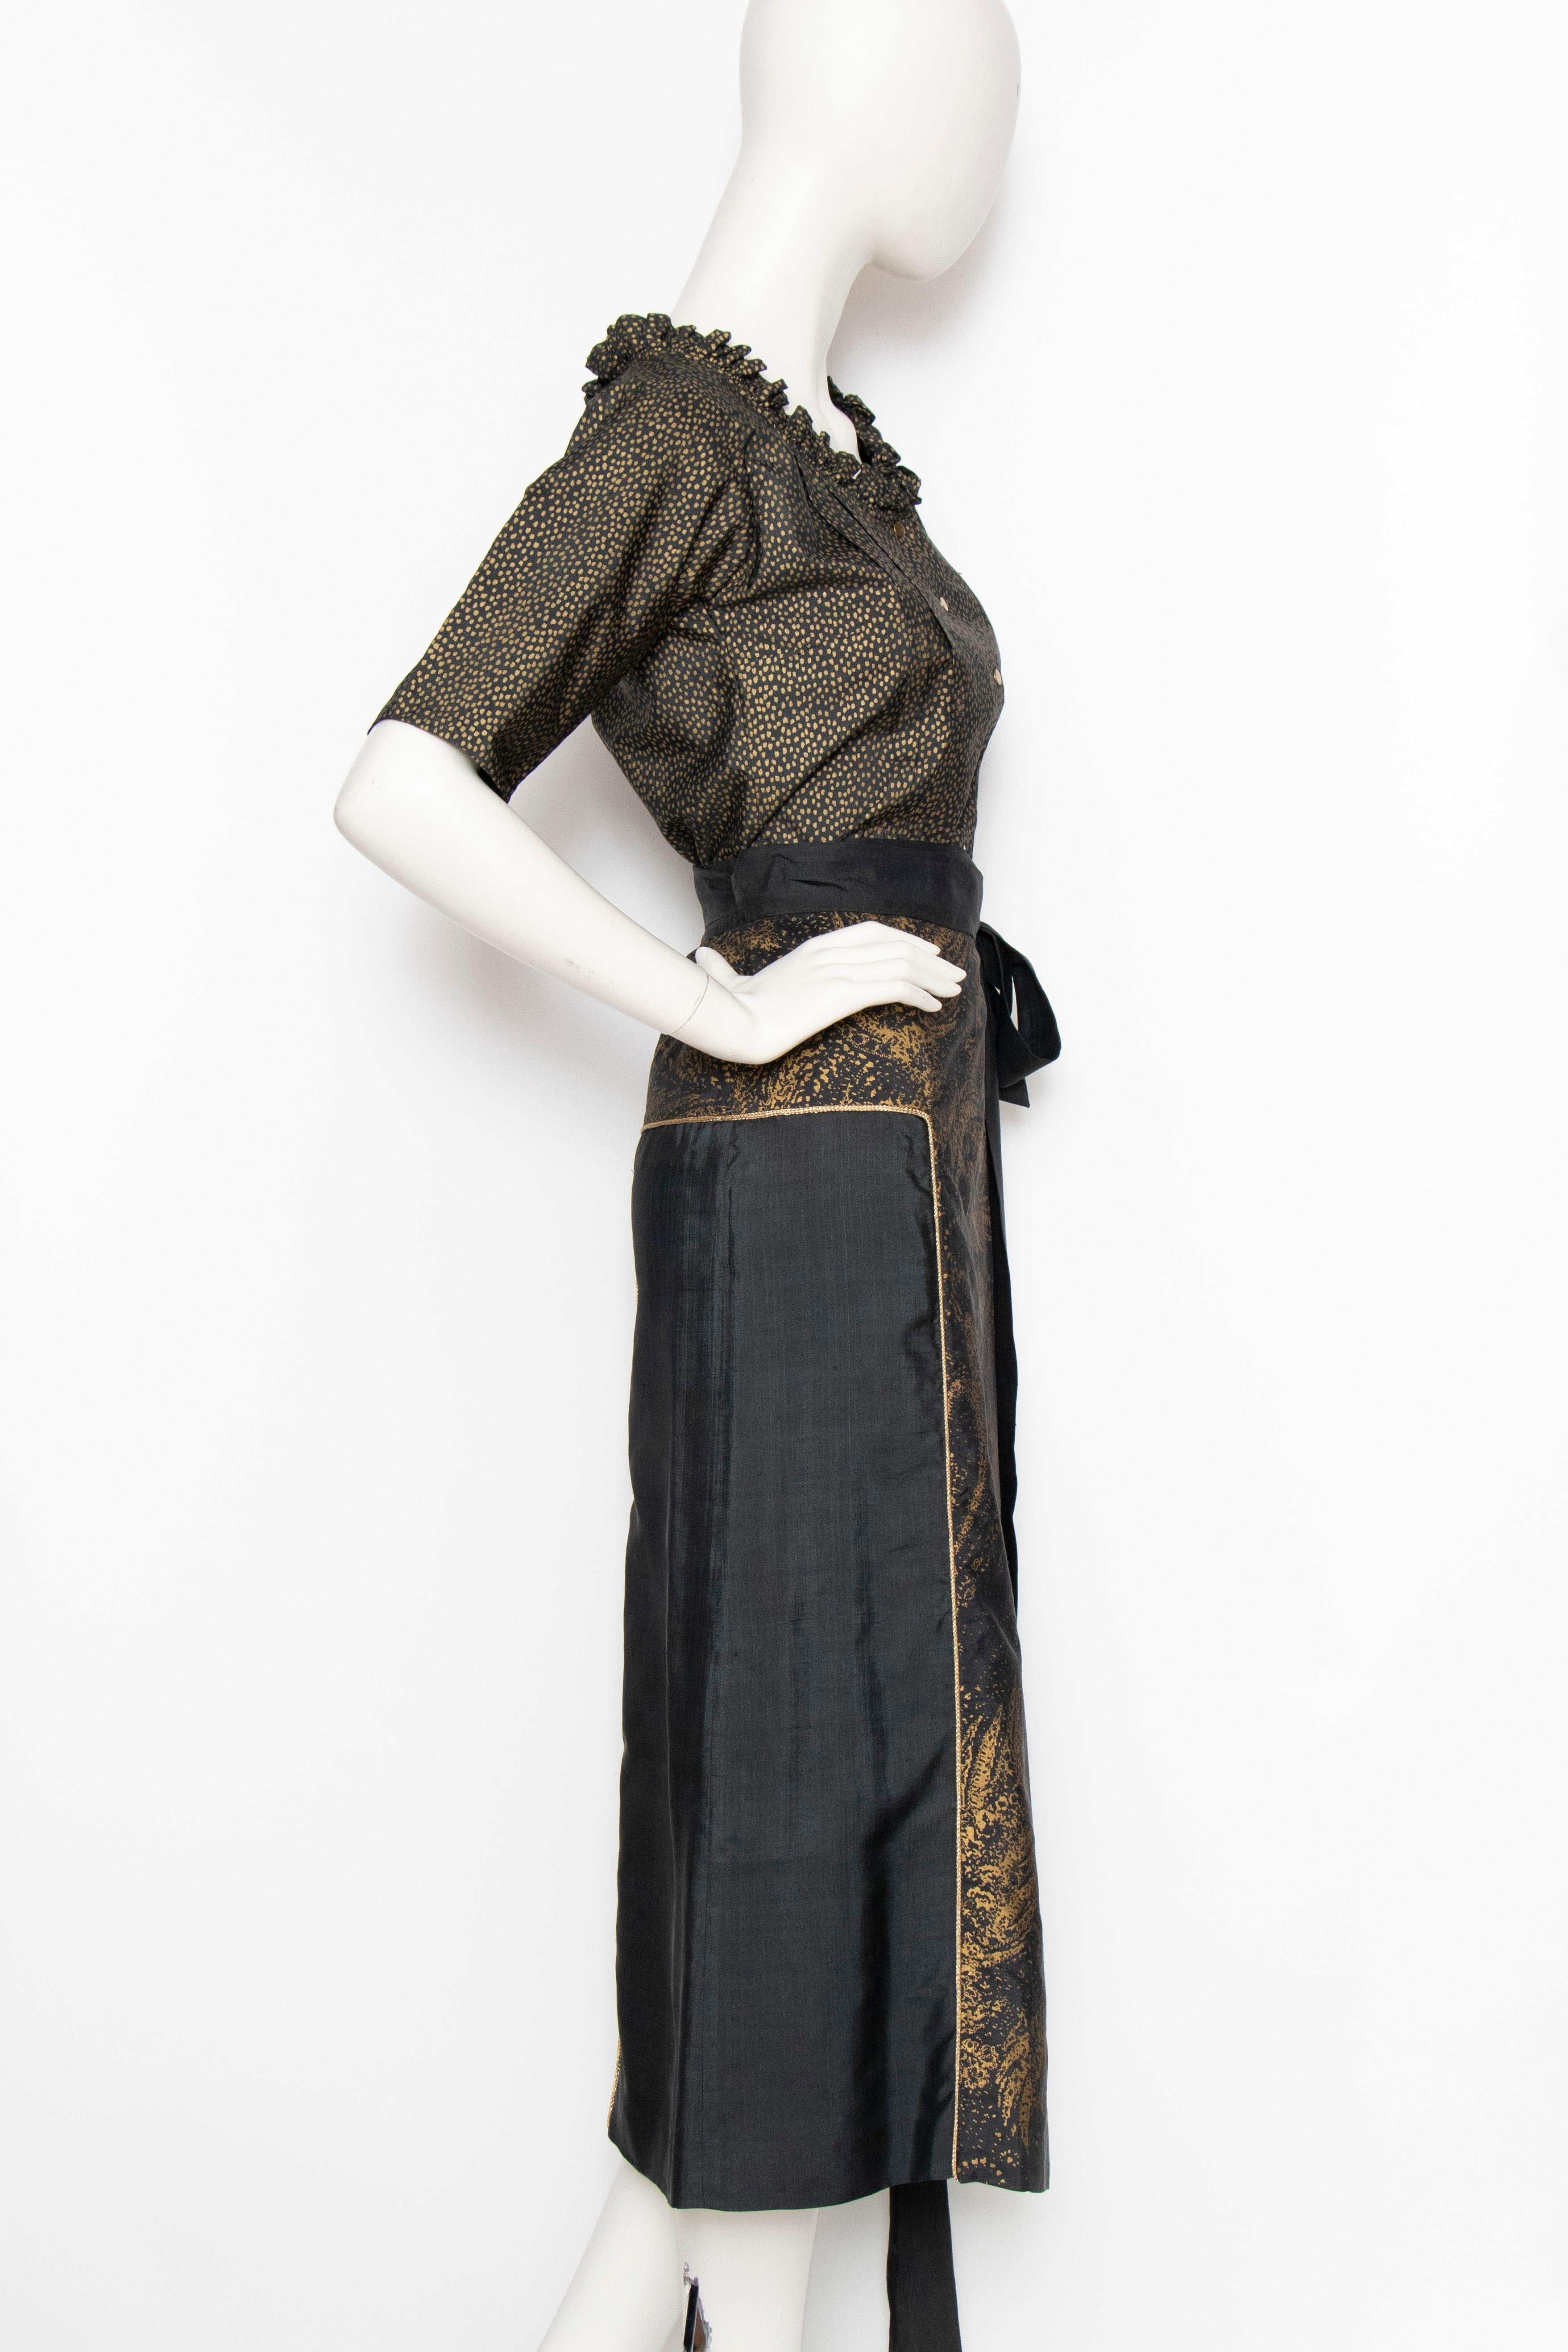 A 1980s Yves Saint Laurent Rive Gauche black and gold silk ensemble consisting of a short-sleeved blouse and wrap skirt. The blouse has a round neckline with small ruffle trim and a push-button front. The skirt has a gold paisley panel down the